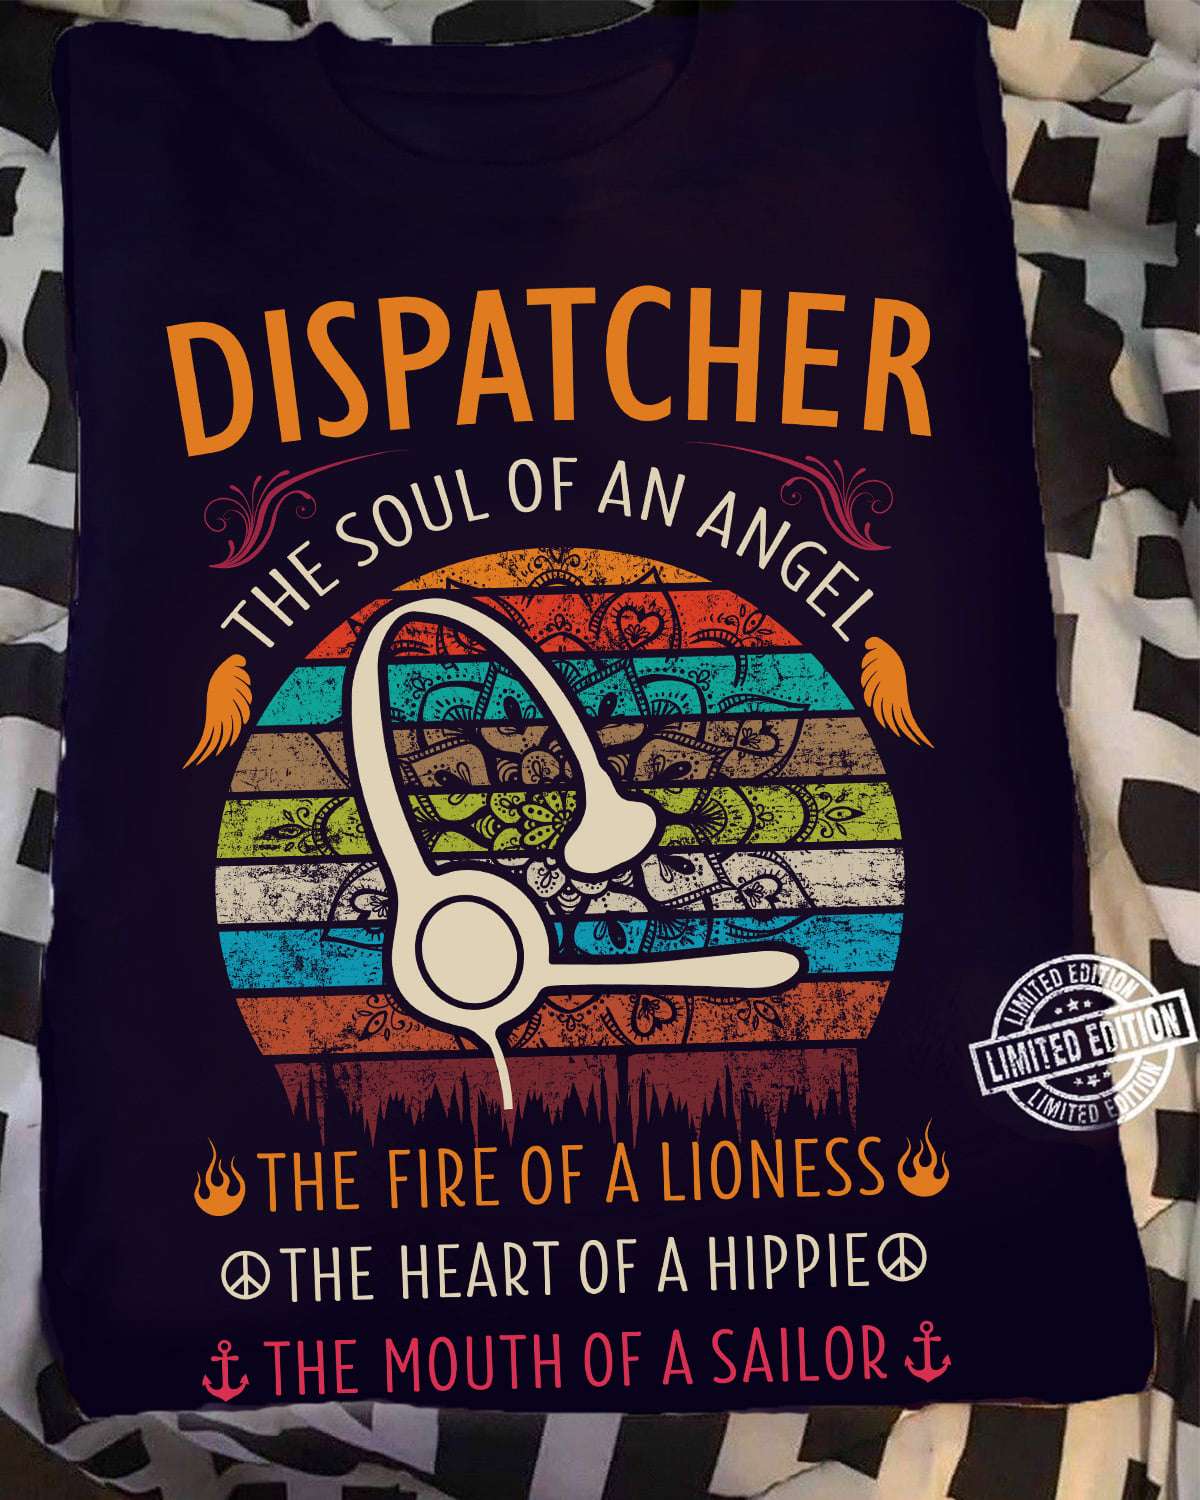 Dispatcher Life - Dispatcher the soul of an angel the fire of a lioness the heart of a hippie